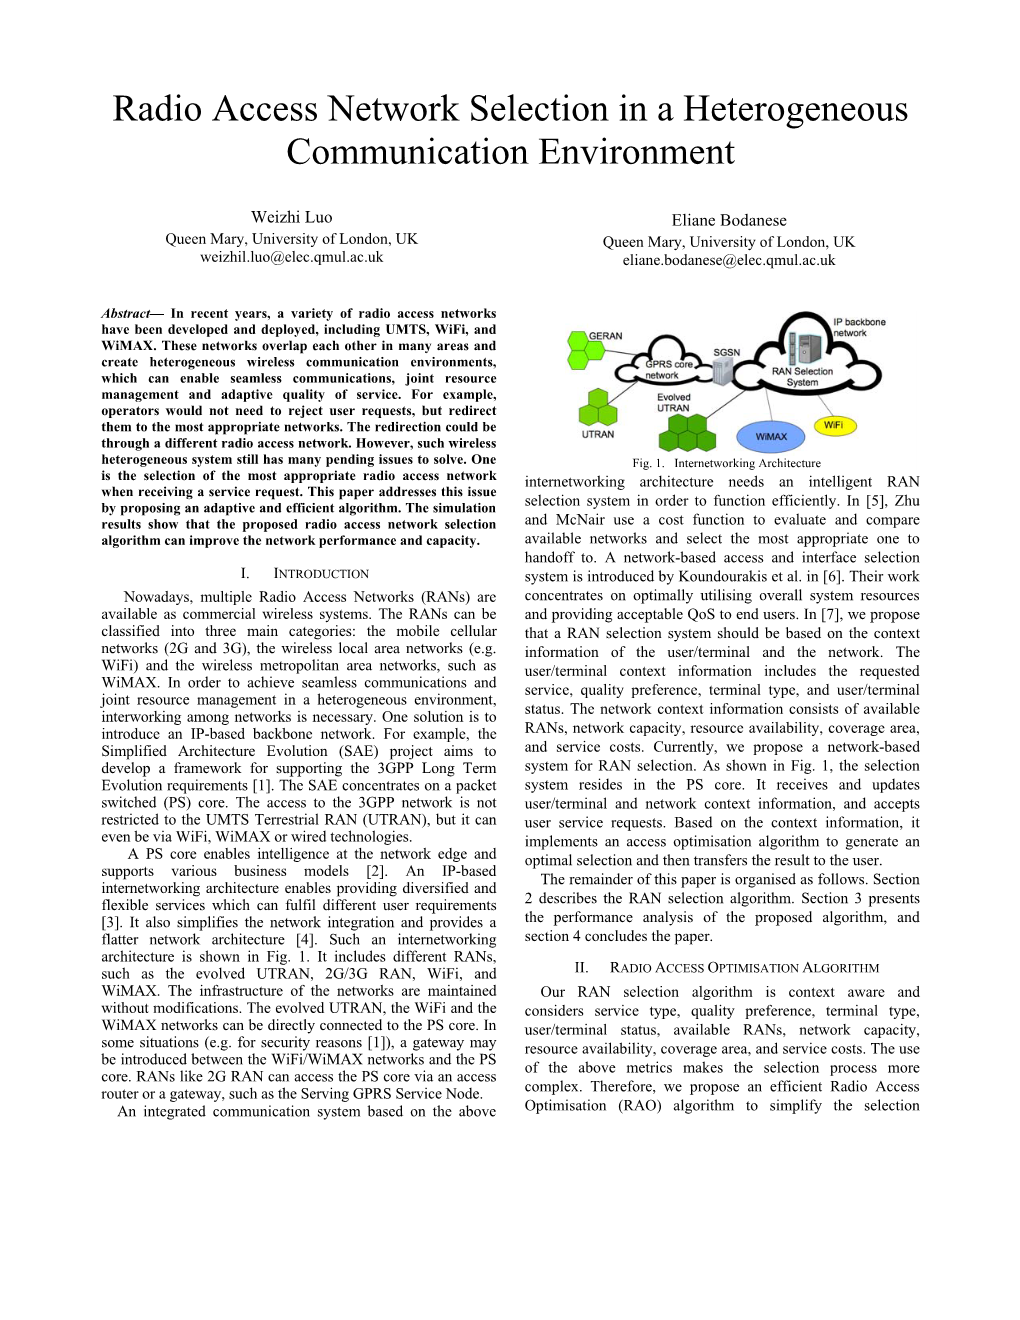 Radio Access Network Selection in a Heterogeneous Communication Environment